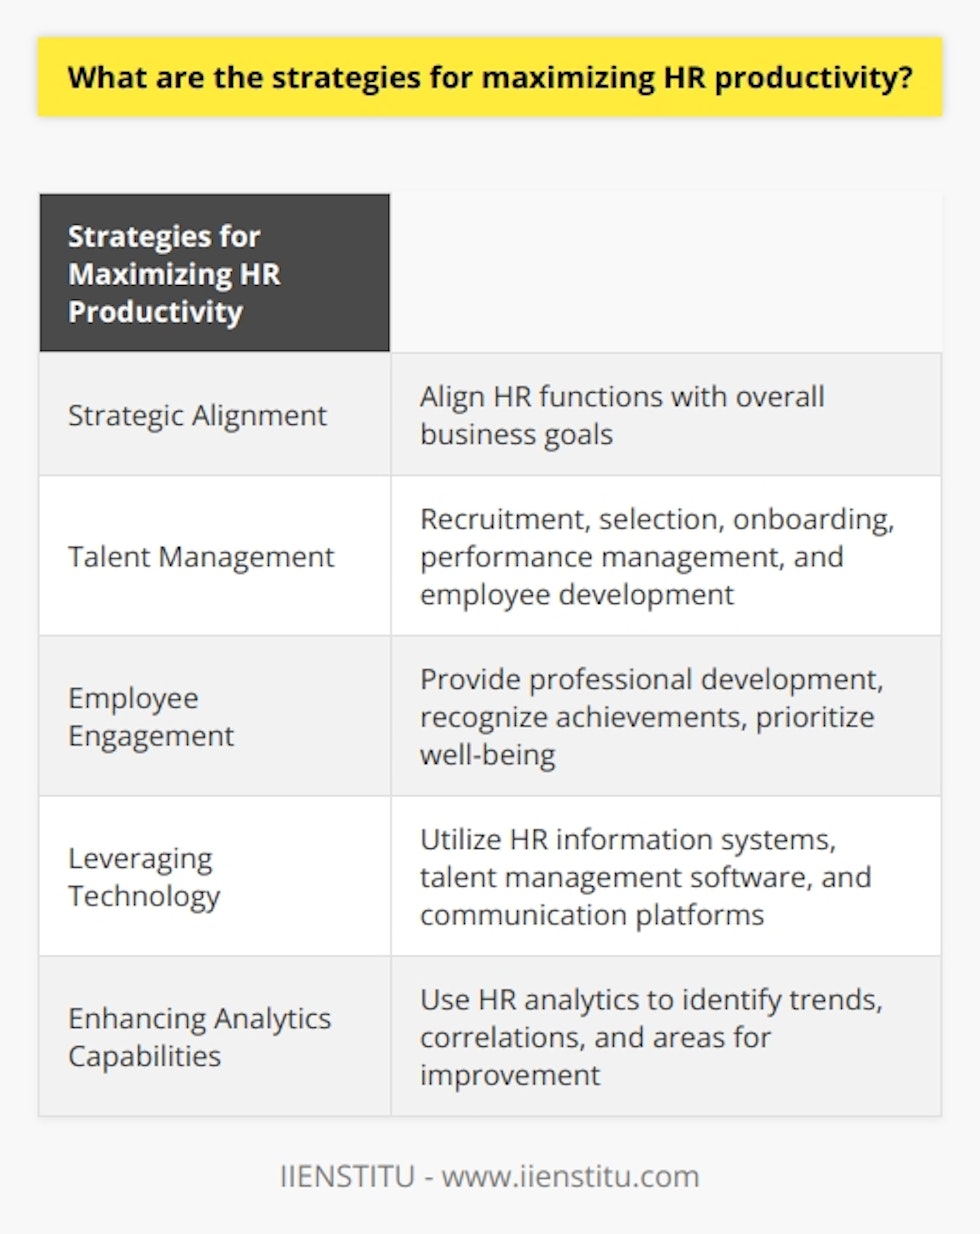 Strategies for maximizing HR productivity are crucial for organizations to thrive in the competitive business landscape. By aligning HR functions with the overall business goals, organizations can effectively contribute to the achievement of desired outcomes. This involves tailoring HR policies and practices according to the company's mission, vision, and values.Another key strategy is developing effective talent management practices. This includes various activities, starting from the recruitment, selection, and onboarding of top talent, to performance management and employee development. By attracting and retaining the best talent, organizations can have a competitive edge in their markets and adapt to the ever-changing business environment.Employee engagement also plays a significant role in maximizing HR productivity. Engaged employees are more likely to be committed, motivated, and productive. HR professionals can foster employee engagement by providing professional development opportunities, recognizing employee achievements, and prioritizing employee well-being. By investing in employee engagement, organizations can achieve higher levels of productivity and potentially reduce turnover.Leveraging HR technology tools is another important strategy. HR information systems, talent management software, and communication platforms have become essential for streamlining and automating processes within the HR domain. By effectively utilizing technology, HR professionals can analyze data to inform strategic decision-making and focus on more strategic activities that drive productivity.Enhancing HR analytics capabilities is crucial in contemporary business environments. Data-driven approaches enable organizations to identify trends, correlations, and areas for improvement. By using HR analytics, organizations can uncover skill gaps within the workforce and invest in targeted training programs to fill those gaps and enhance employee productivity.To maximize HR productivity, organizations should focus on strategic alignment, effective talent management practices, employee engagement, leveraging technology, and enhancing analytics capabilities. By prioritizing these strategies, organizations can create a high-performing HR function that drives overall business performance and achieves desired outcomes.